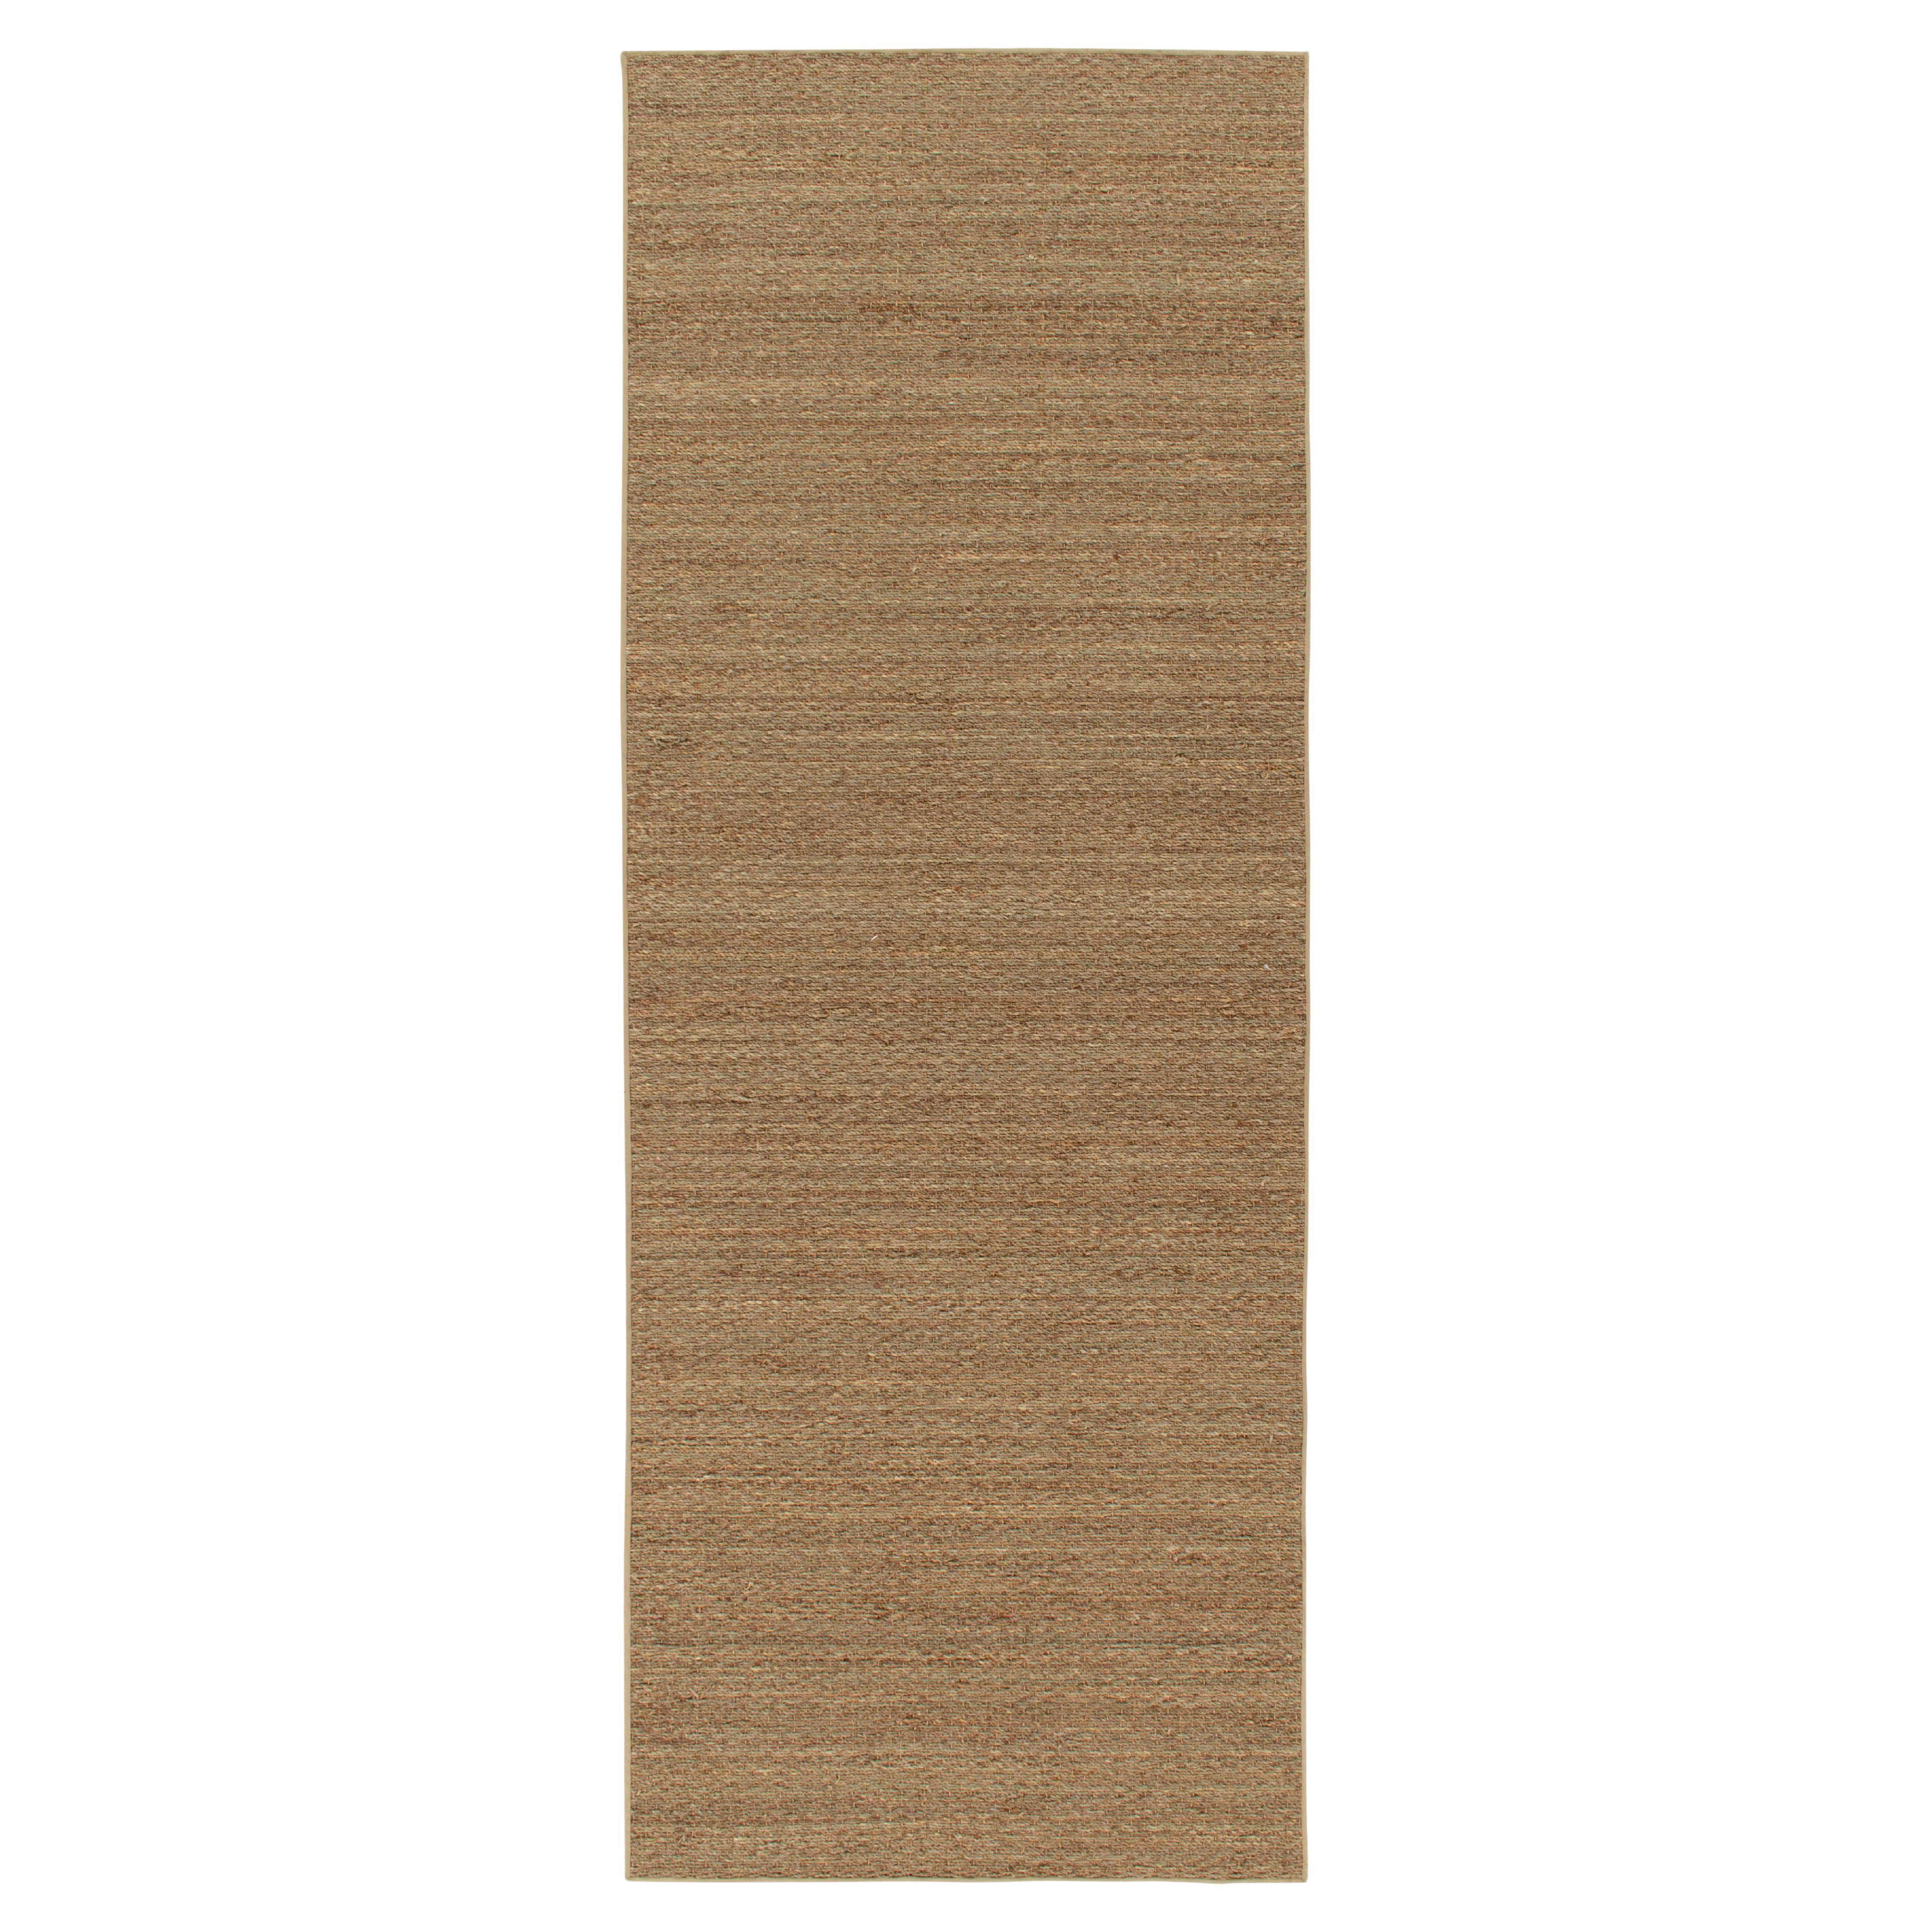 Rug & Kilim's Contemporary Style Hemp Runner in Solid Brown For Sale